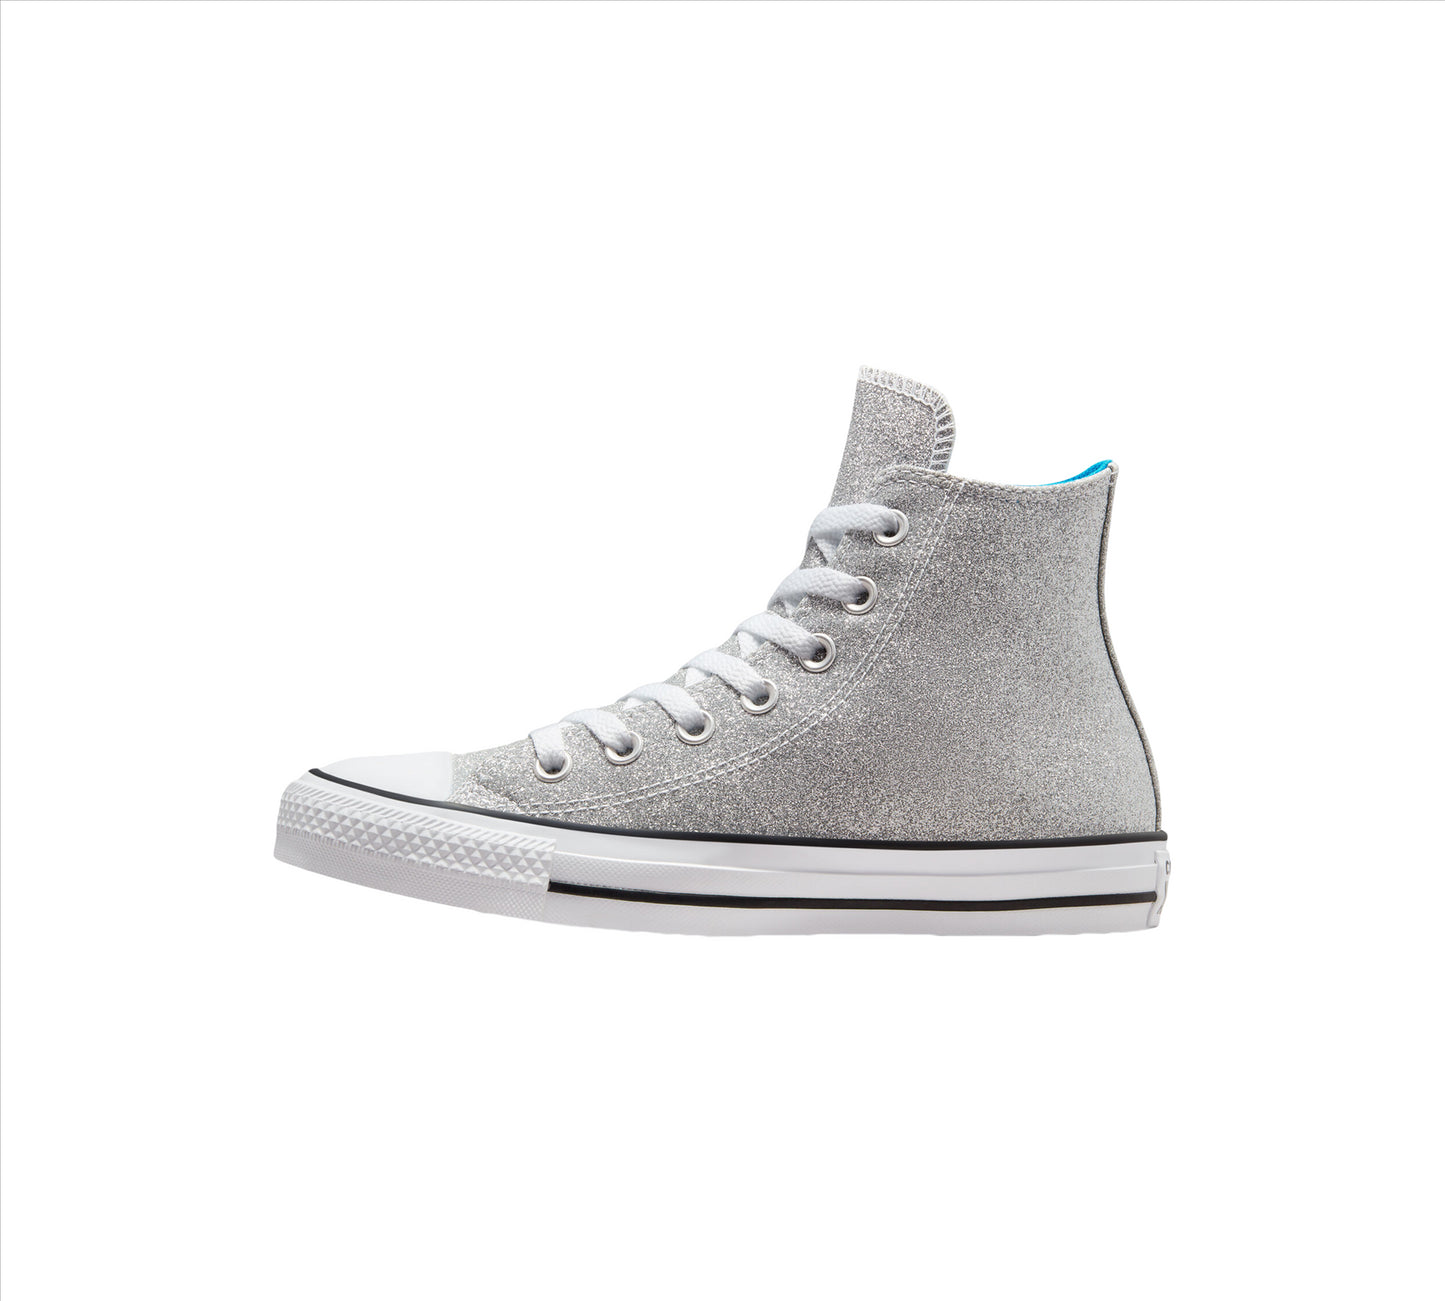 Converse Authentic Glam Chuck Taylor All Star Schuhe